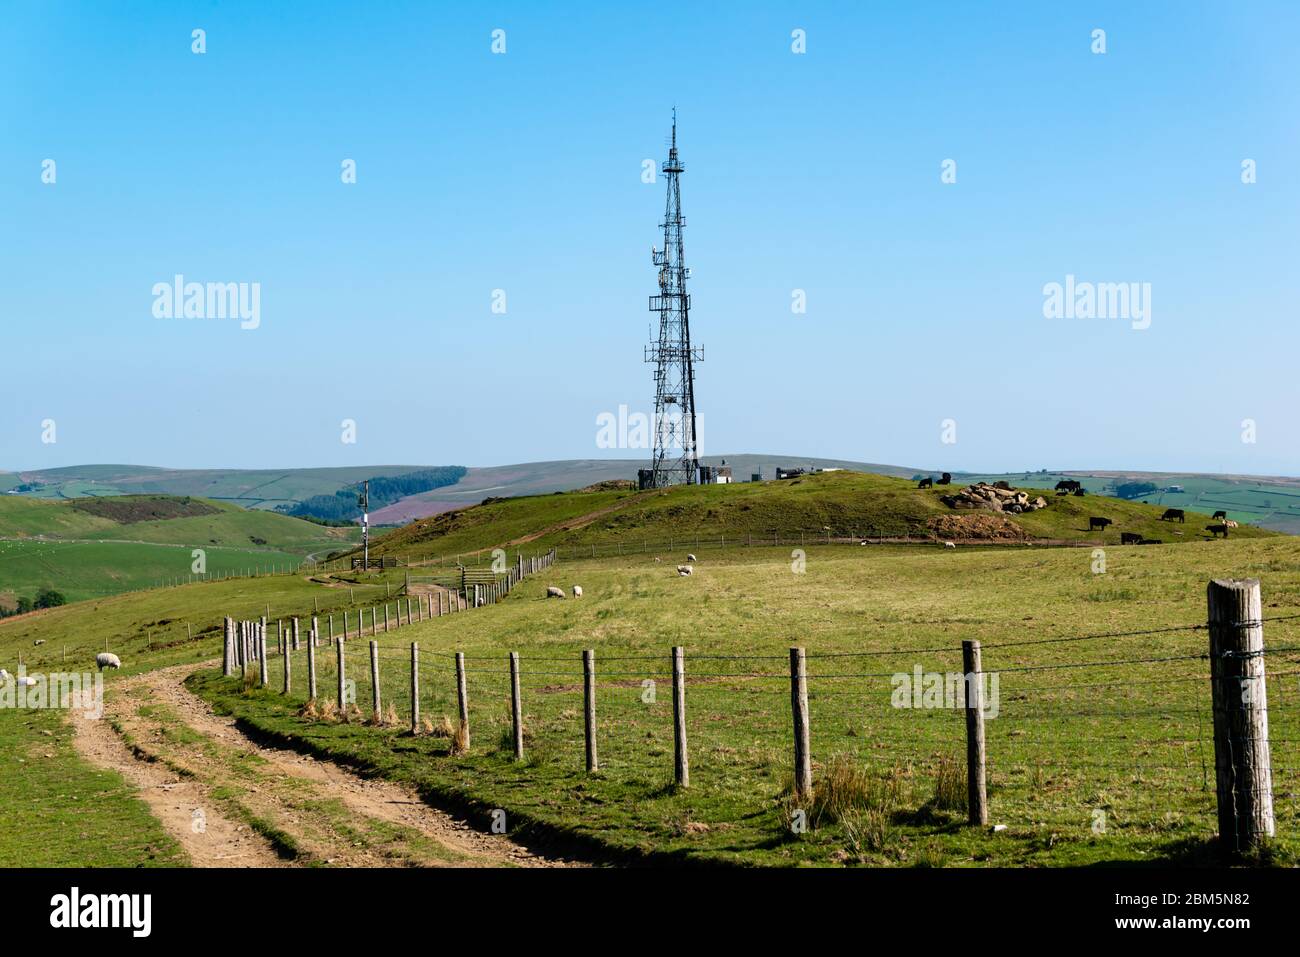 Tranmission mast on top of a mound surrounded by cattle Stock Photo